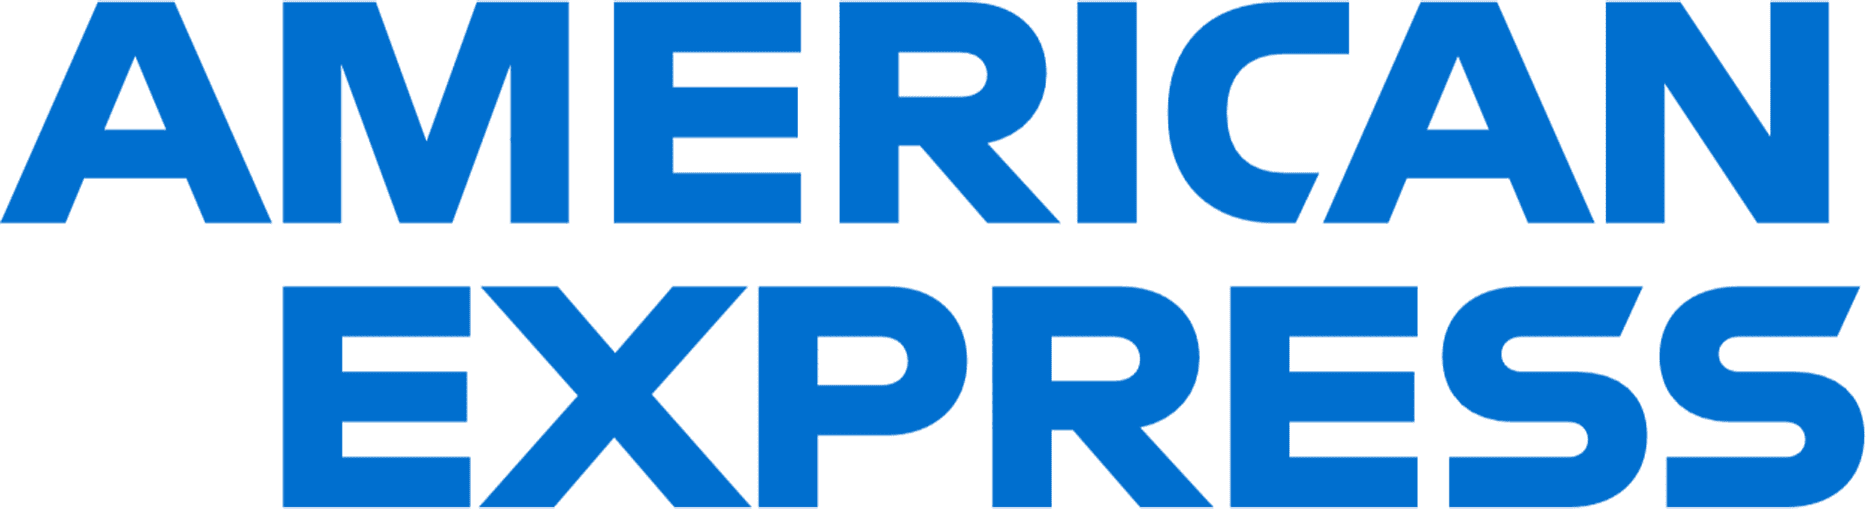 Financial-Resources-AMEX